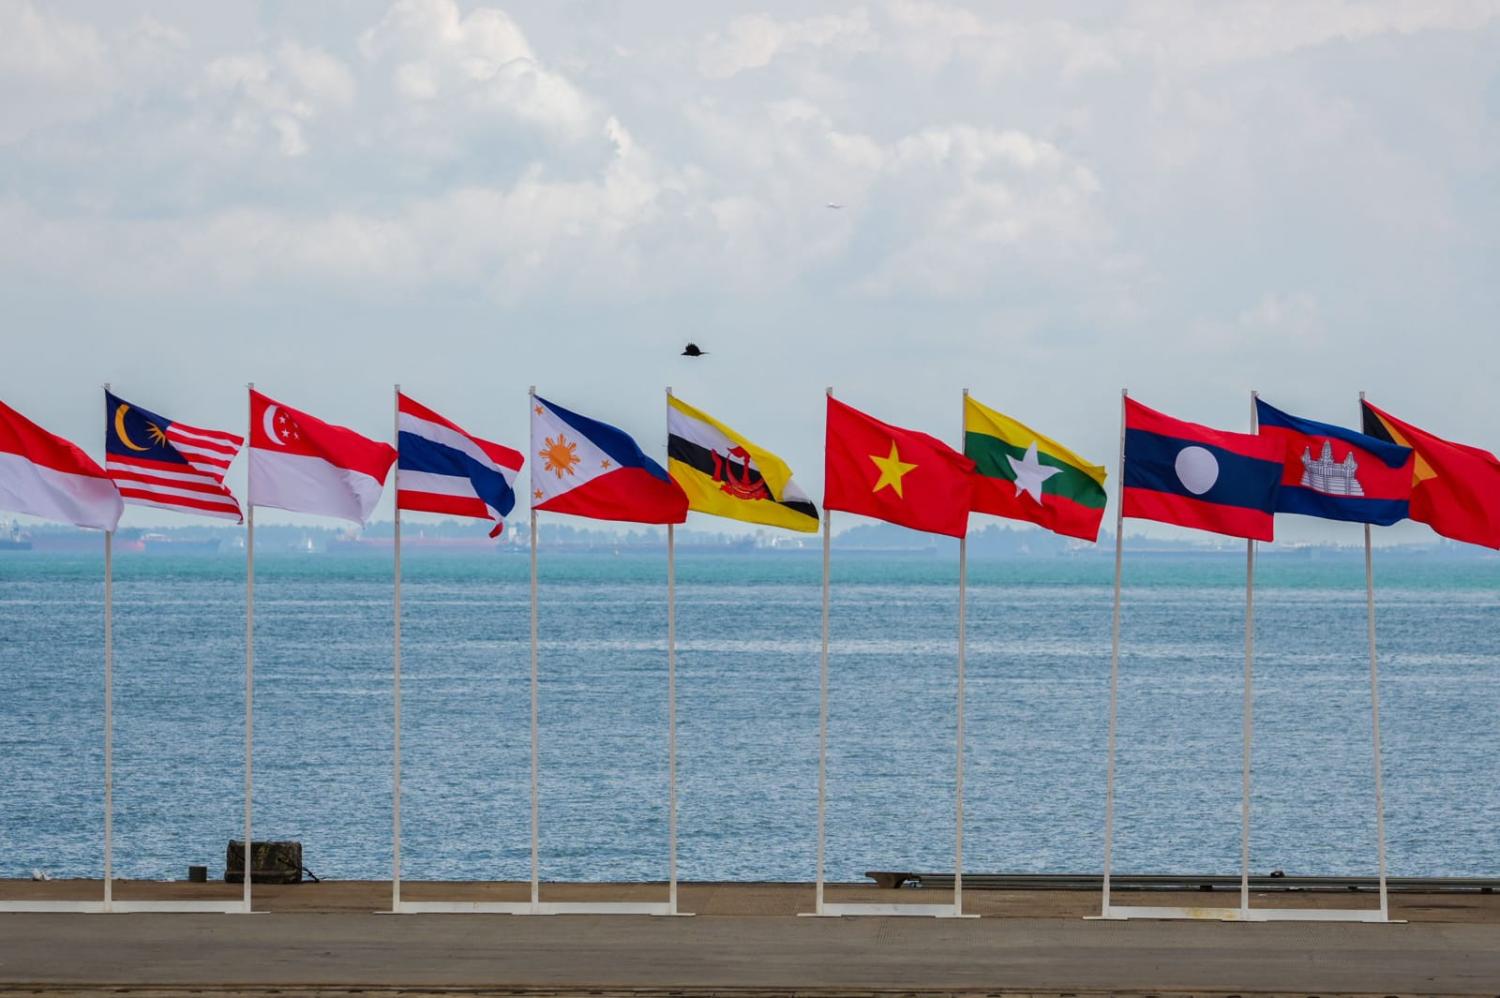 ASEAN flags are displayed at a naval base during the ASEAN Solidarity Exercise Natuna 2023 in Batam in the Riau Islands province, Indonesia (Bay Ismoyo/AFP via Getty Images)